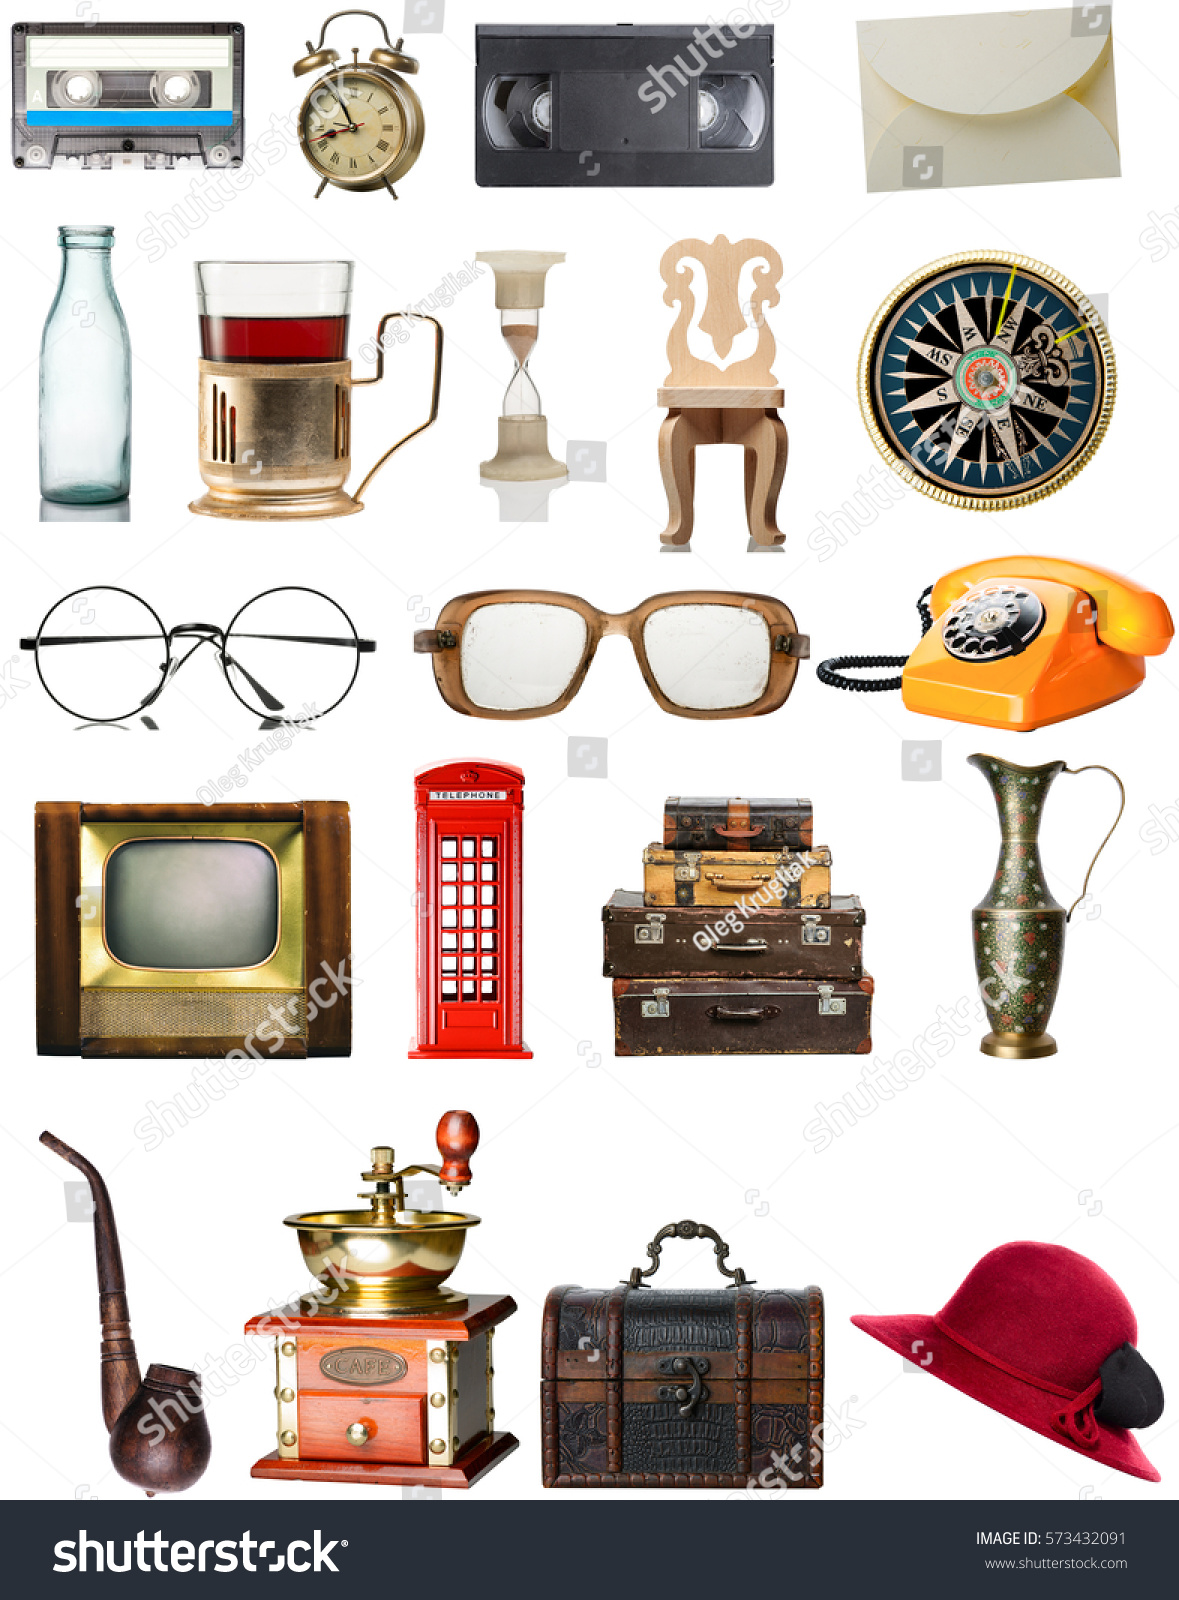 Old items. Vintage items PNG.